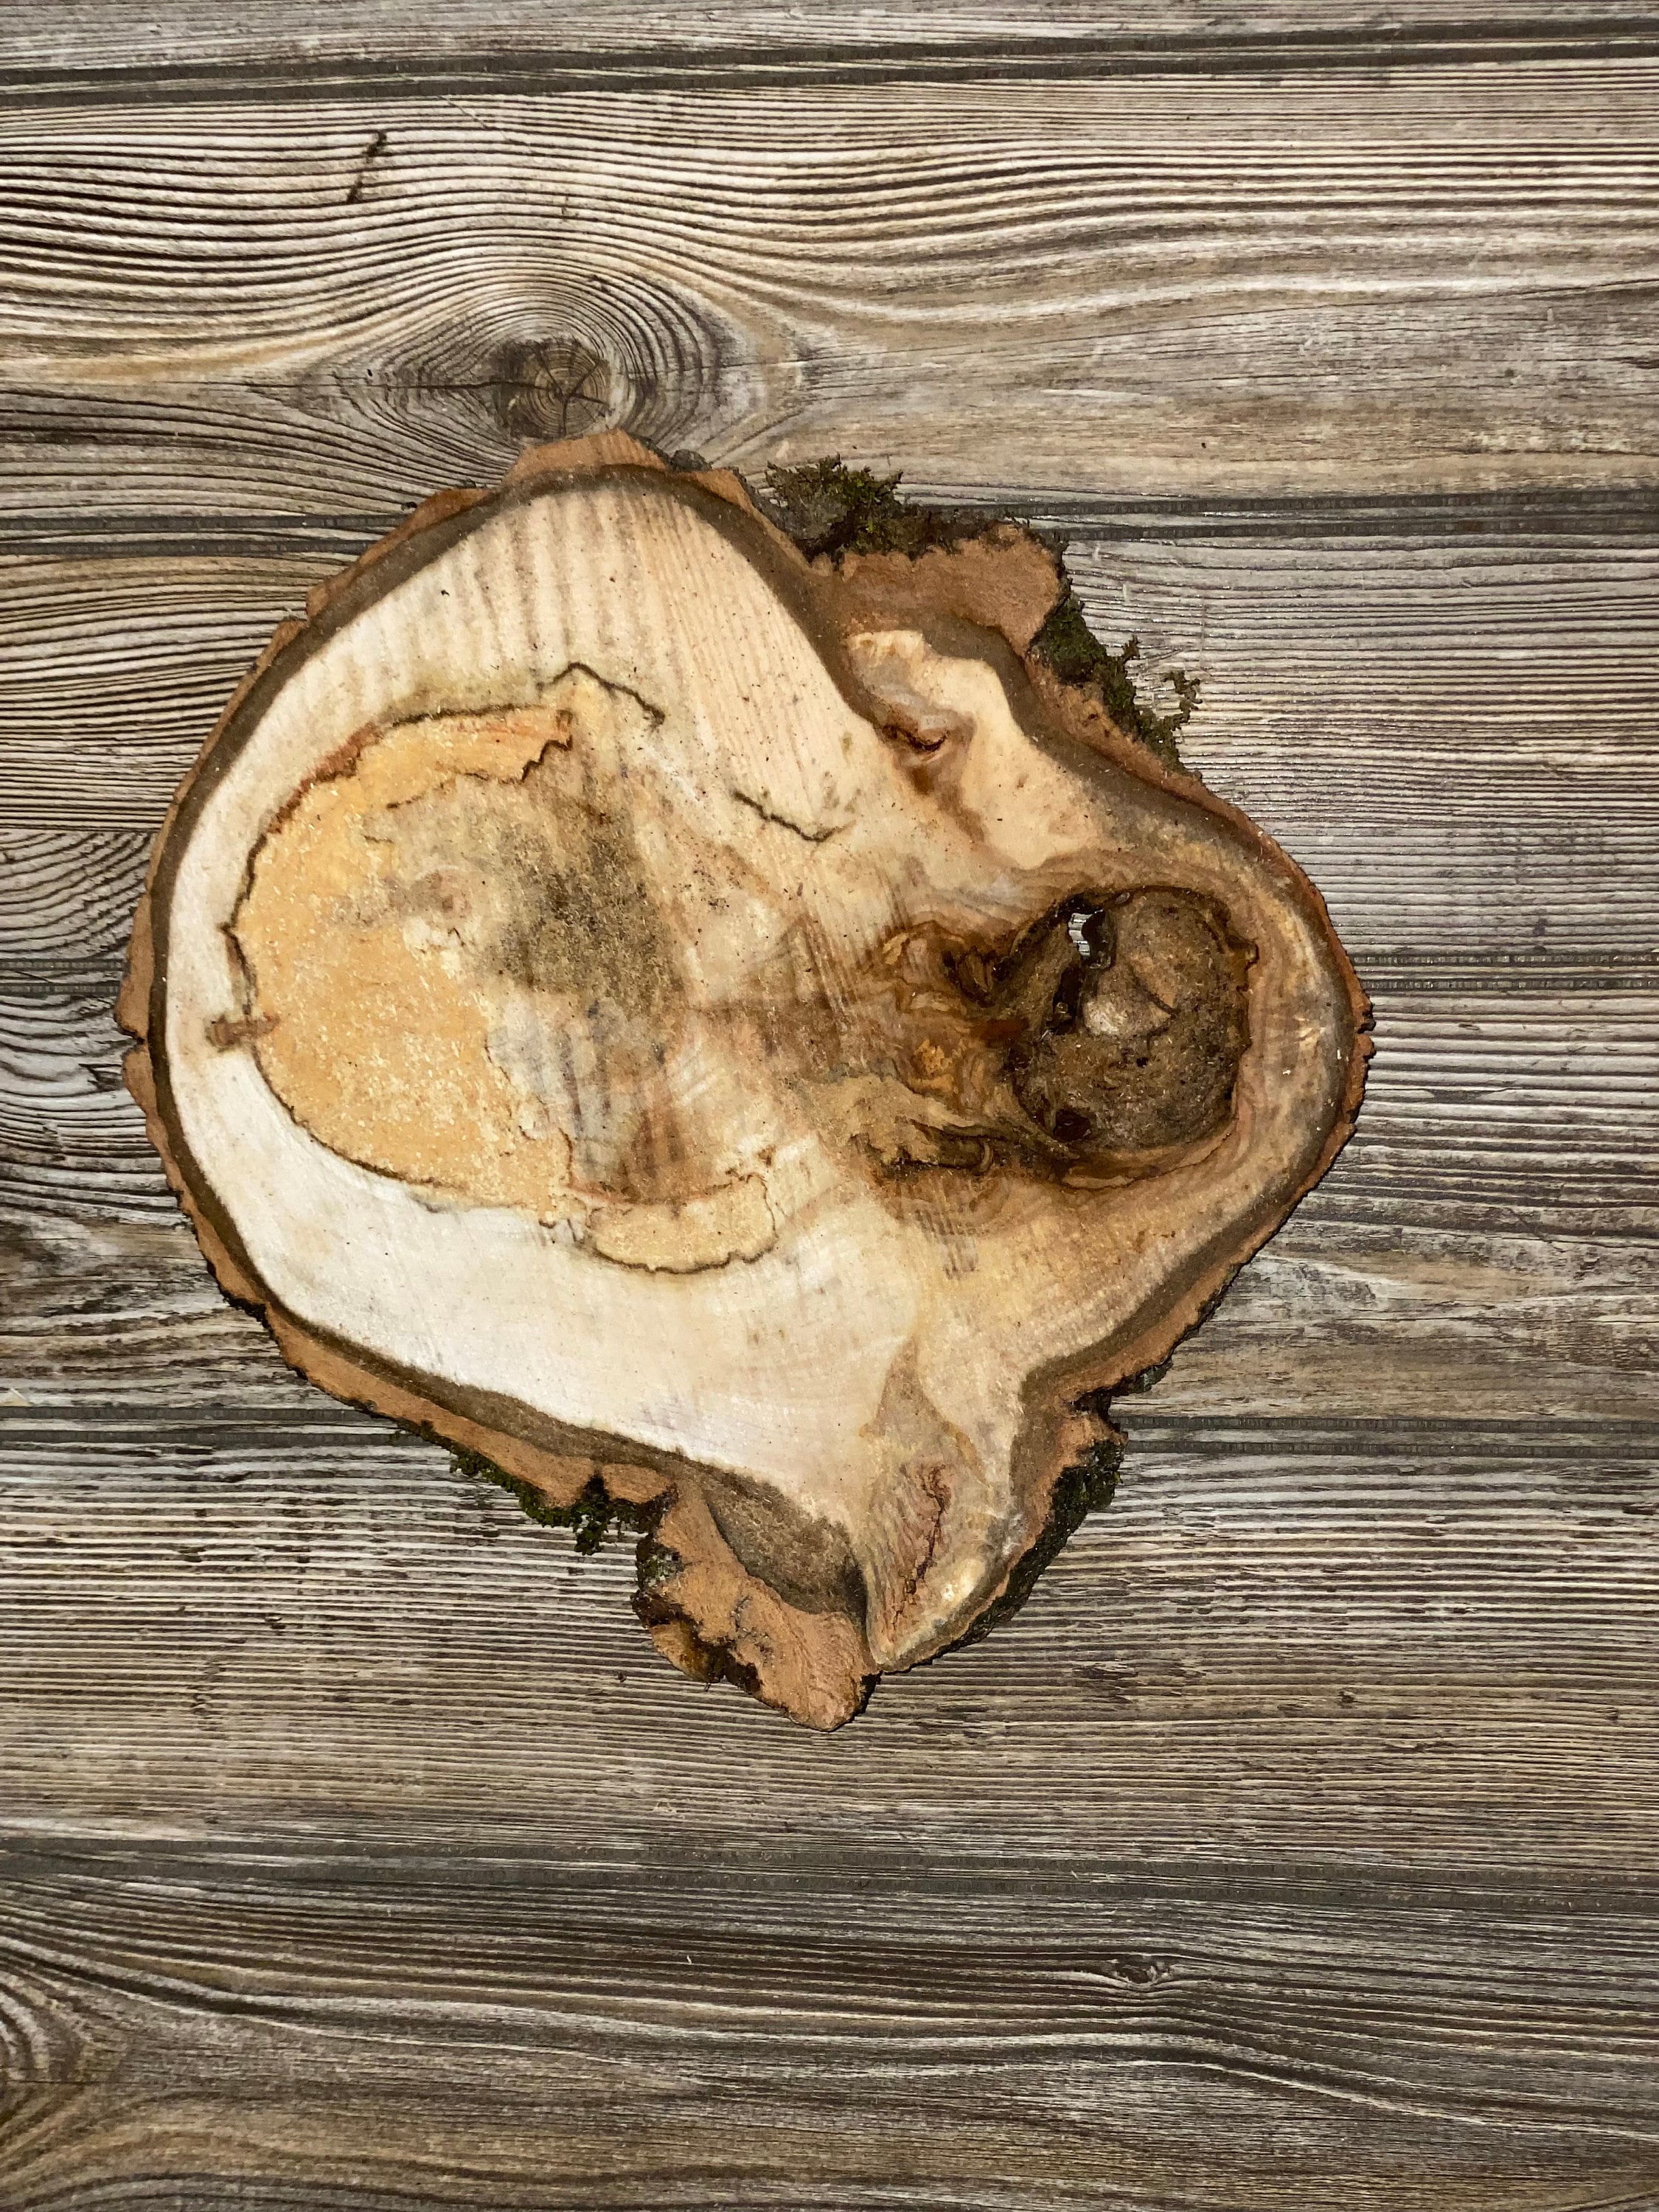 Aspen Burl Slice, Approximately 11 Inches Long by 10.5 Inches Wide and 3/4 Inches Thick